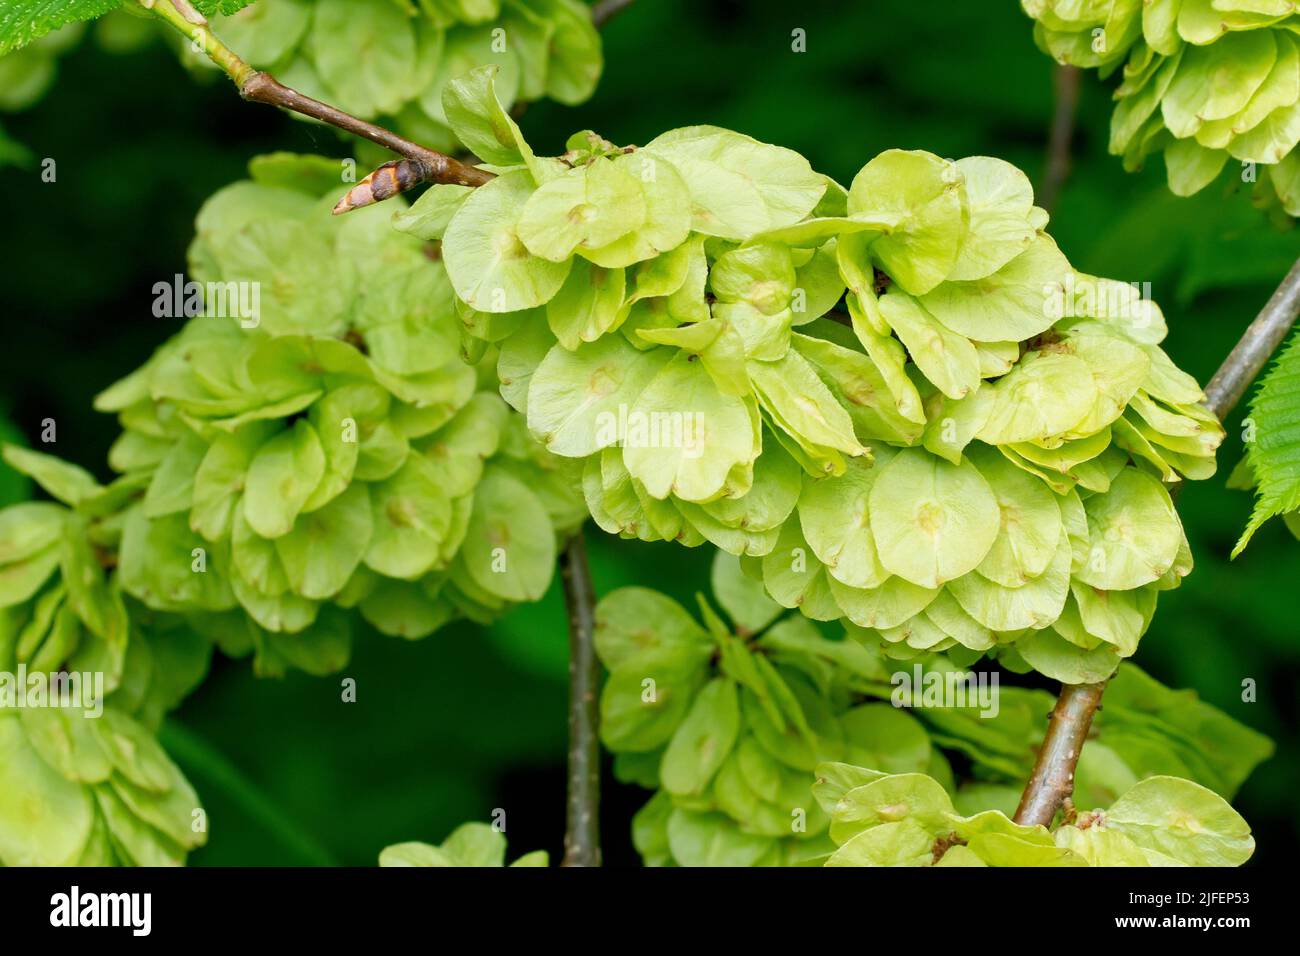 Wych Elm (ulmus glabra), close up of a mass of the thin round seed pods the tree produces in abundance during the spring. Stock Photo